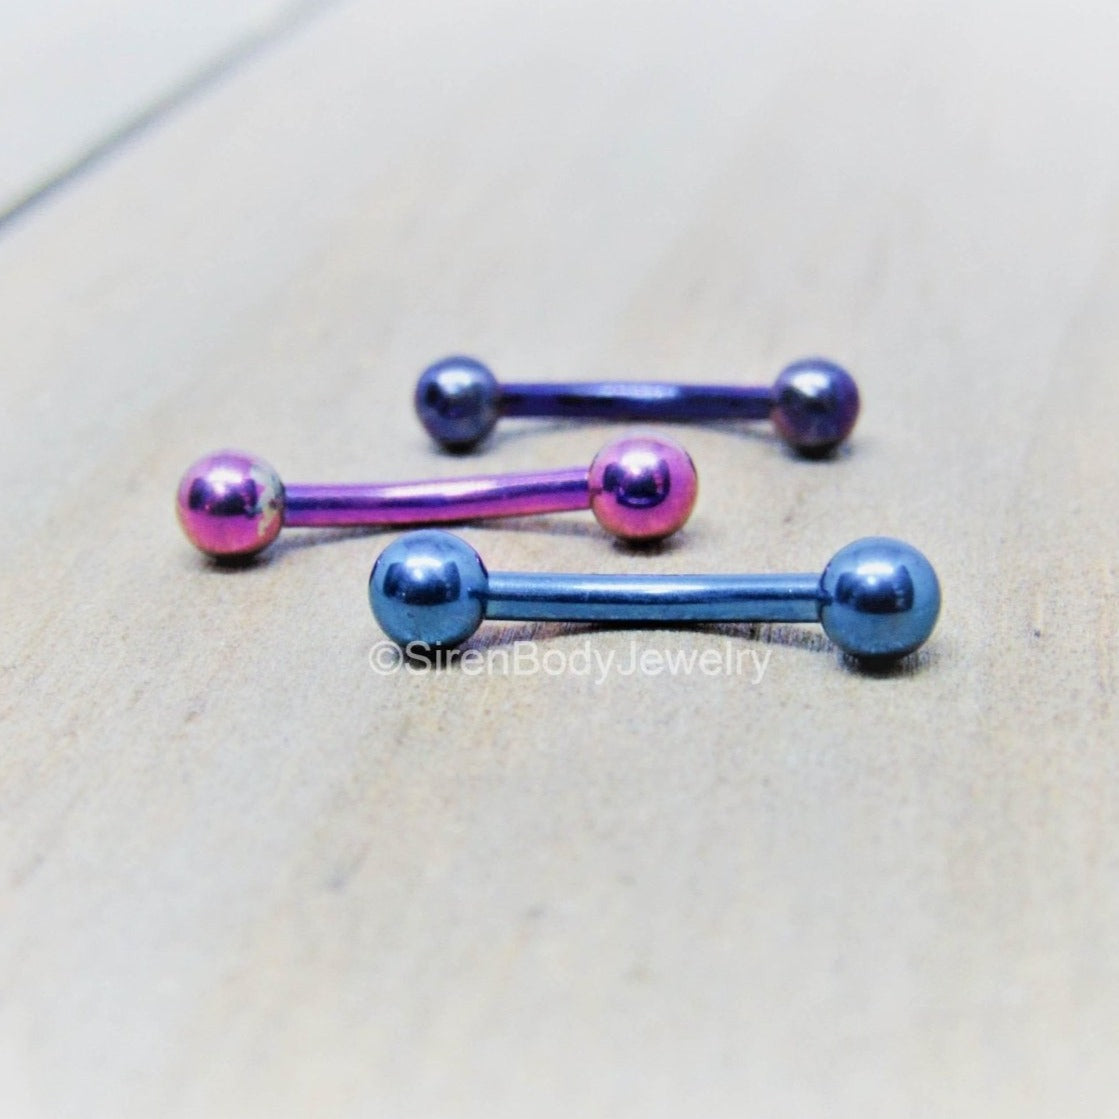 Titanium rook piercing barbell 16g 5/16" internally threaded hypoallergenic daith curved barbell eyebrow ring vertical labret stud - SirenBodyJewelry